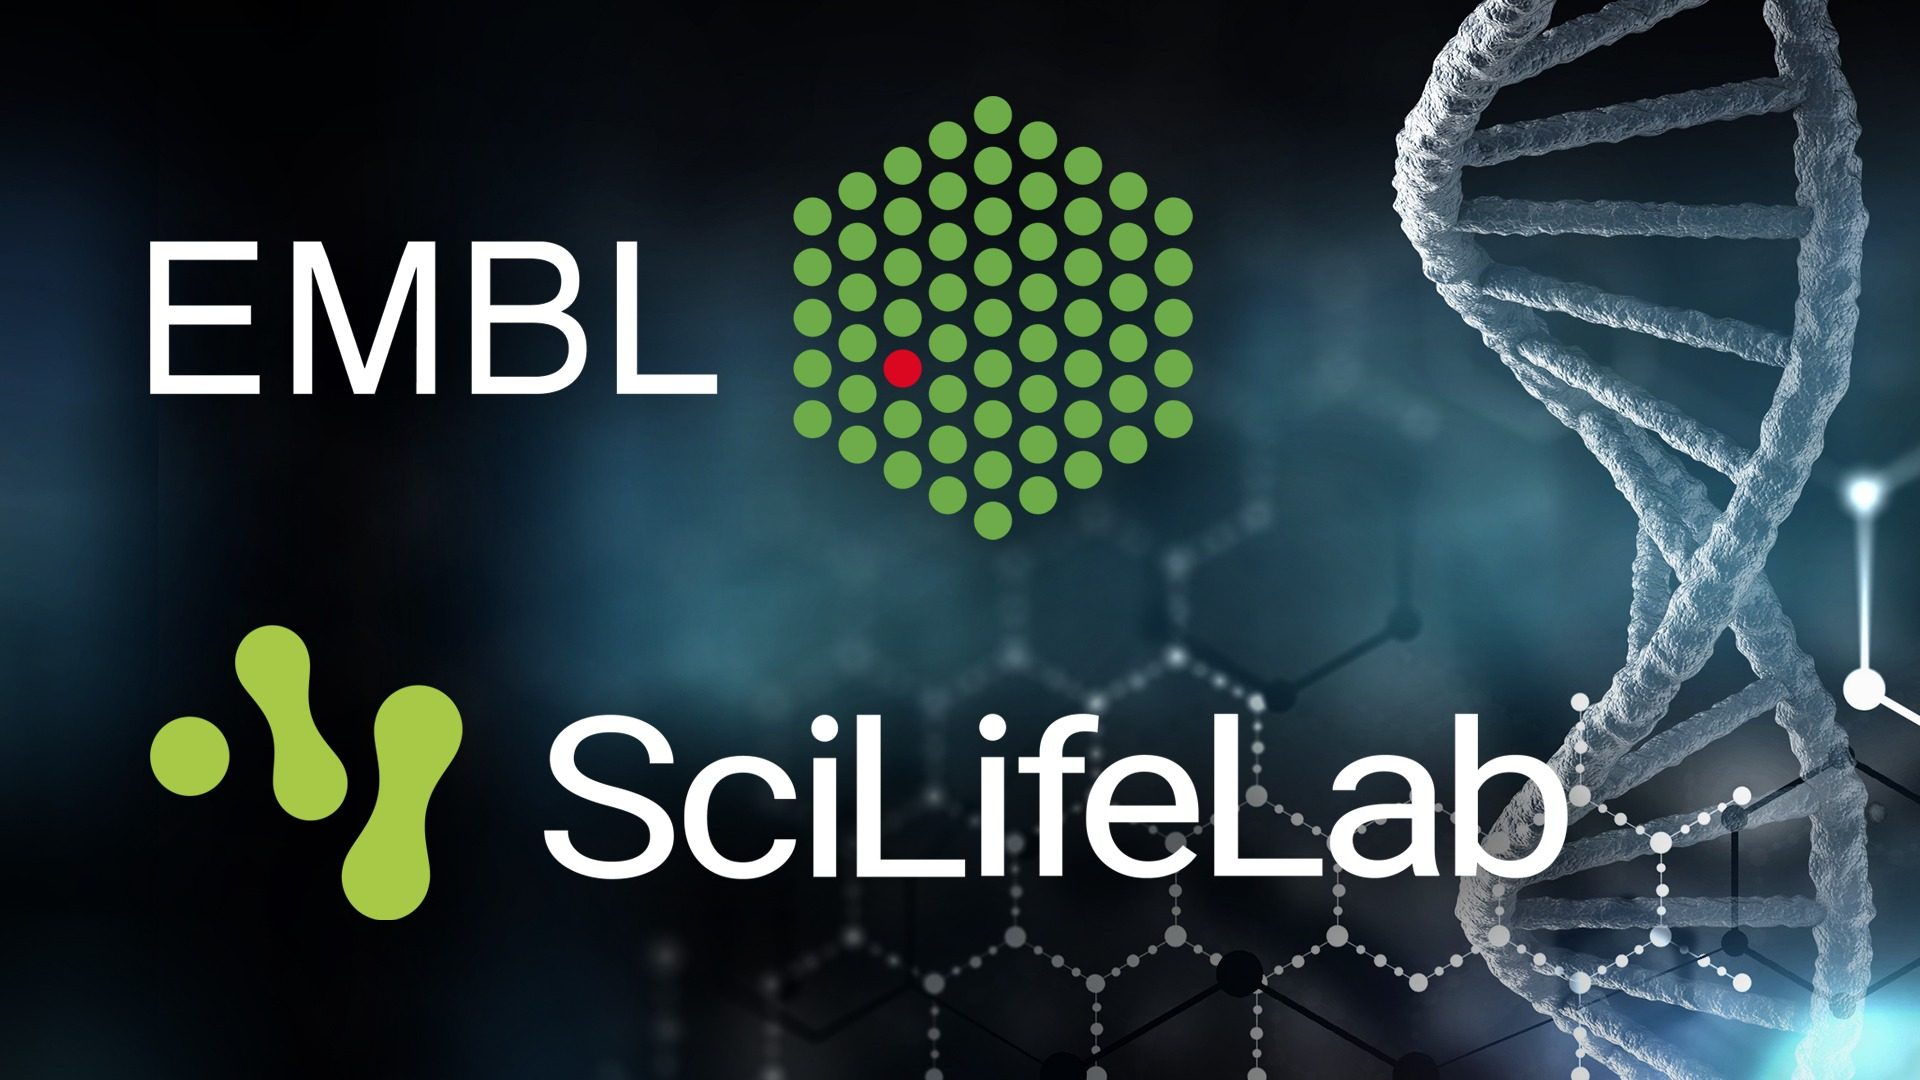 Travel grants for promoting SciLifeLab collaboration with EMBL